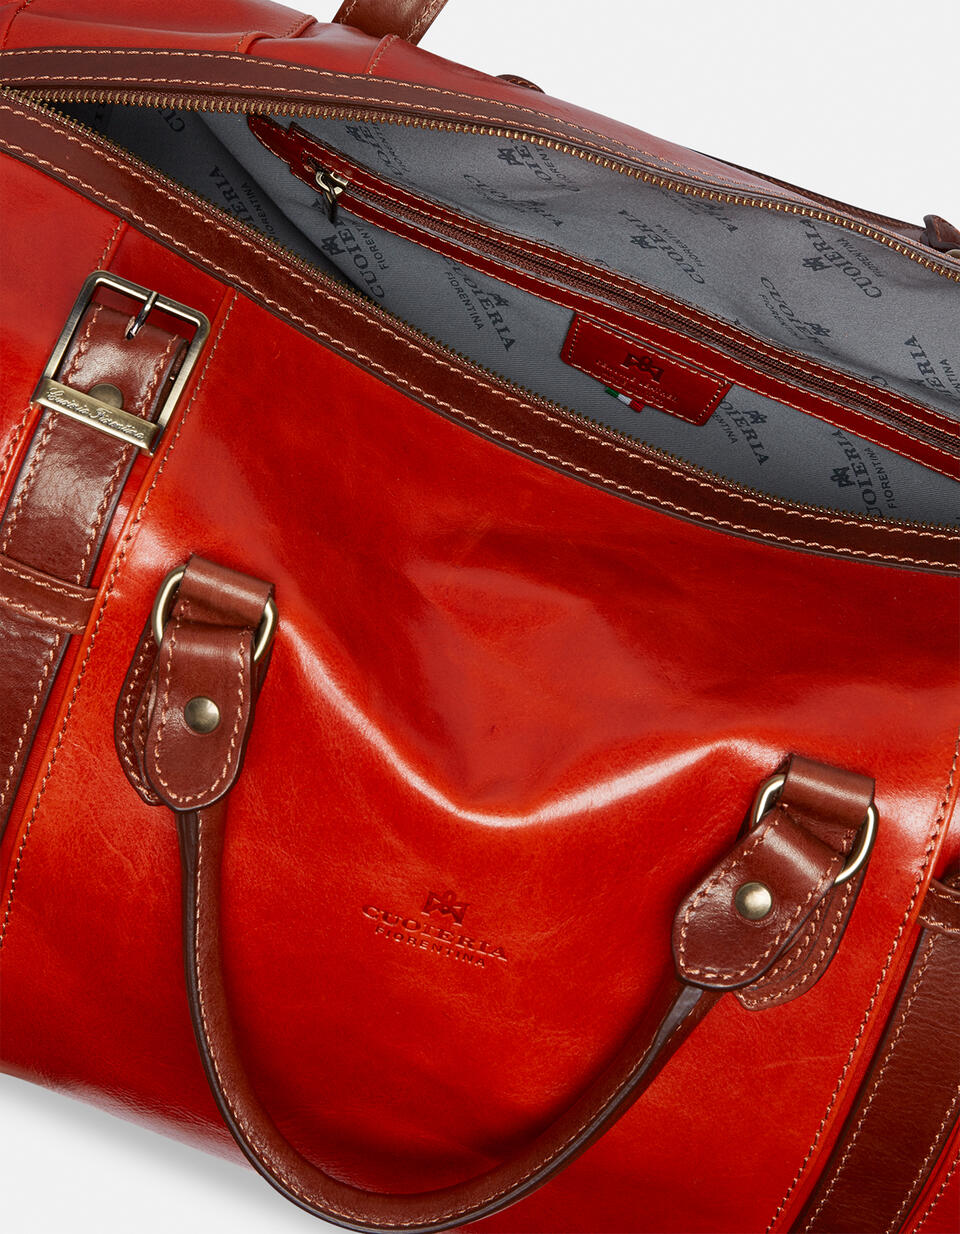 Leather travel bag with two handles - Luggage | TRAVEL BAGS ARANCIOBICOLORE - Luggage | TRAVEL BAGSCuoieria Fiorentina